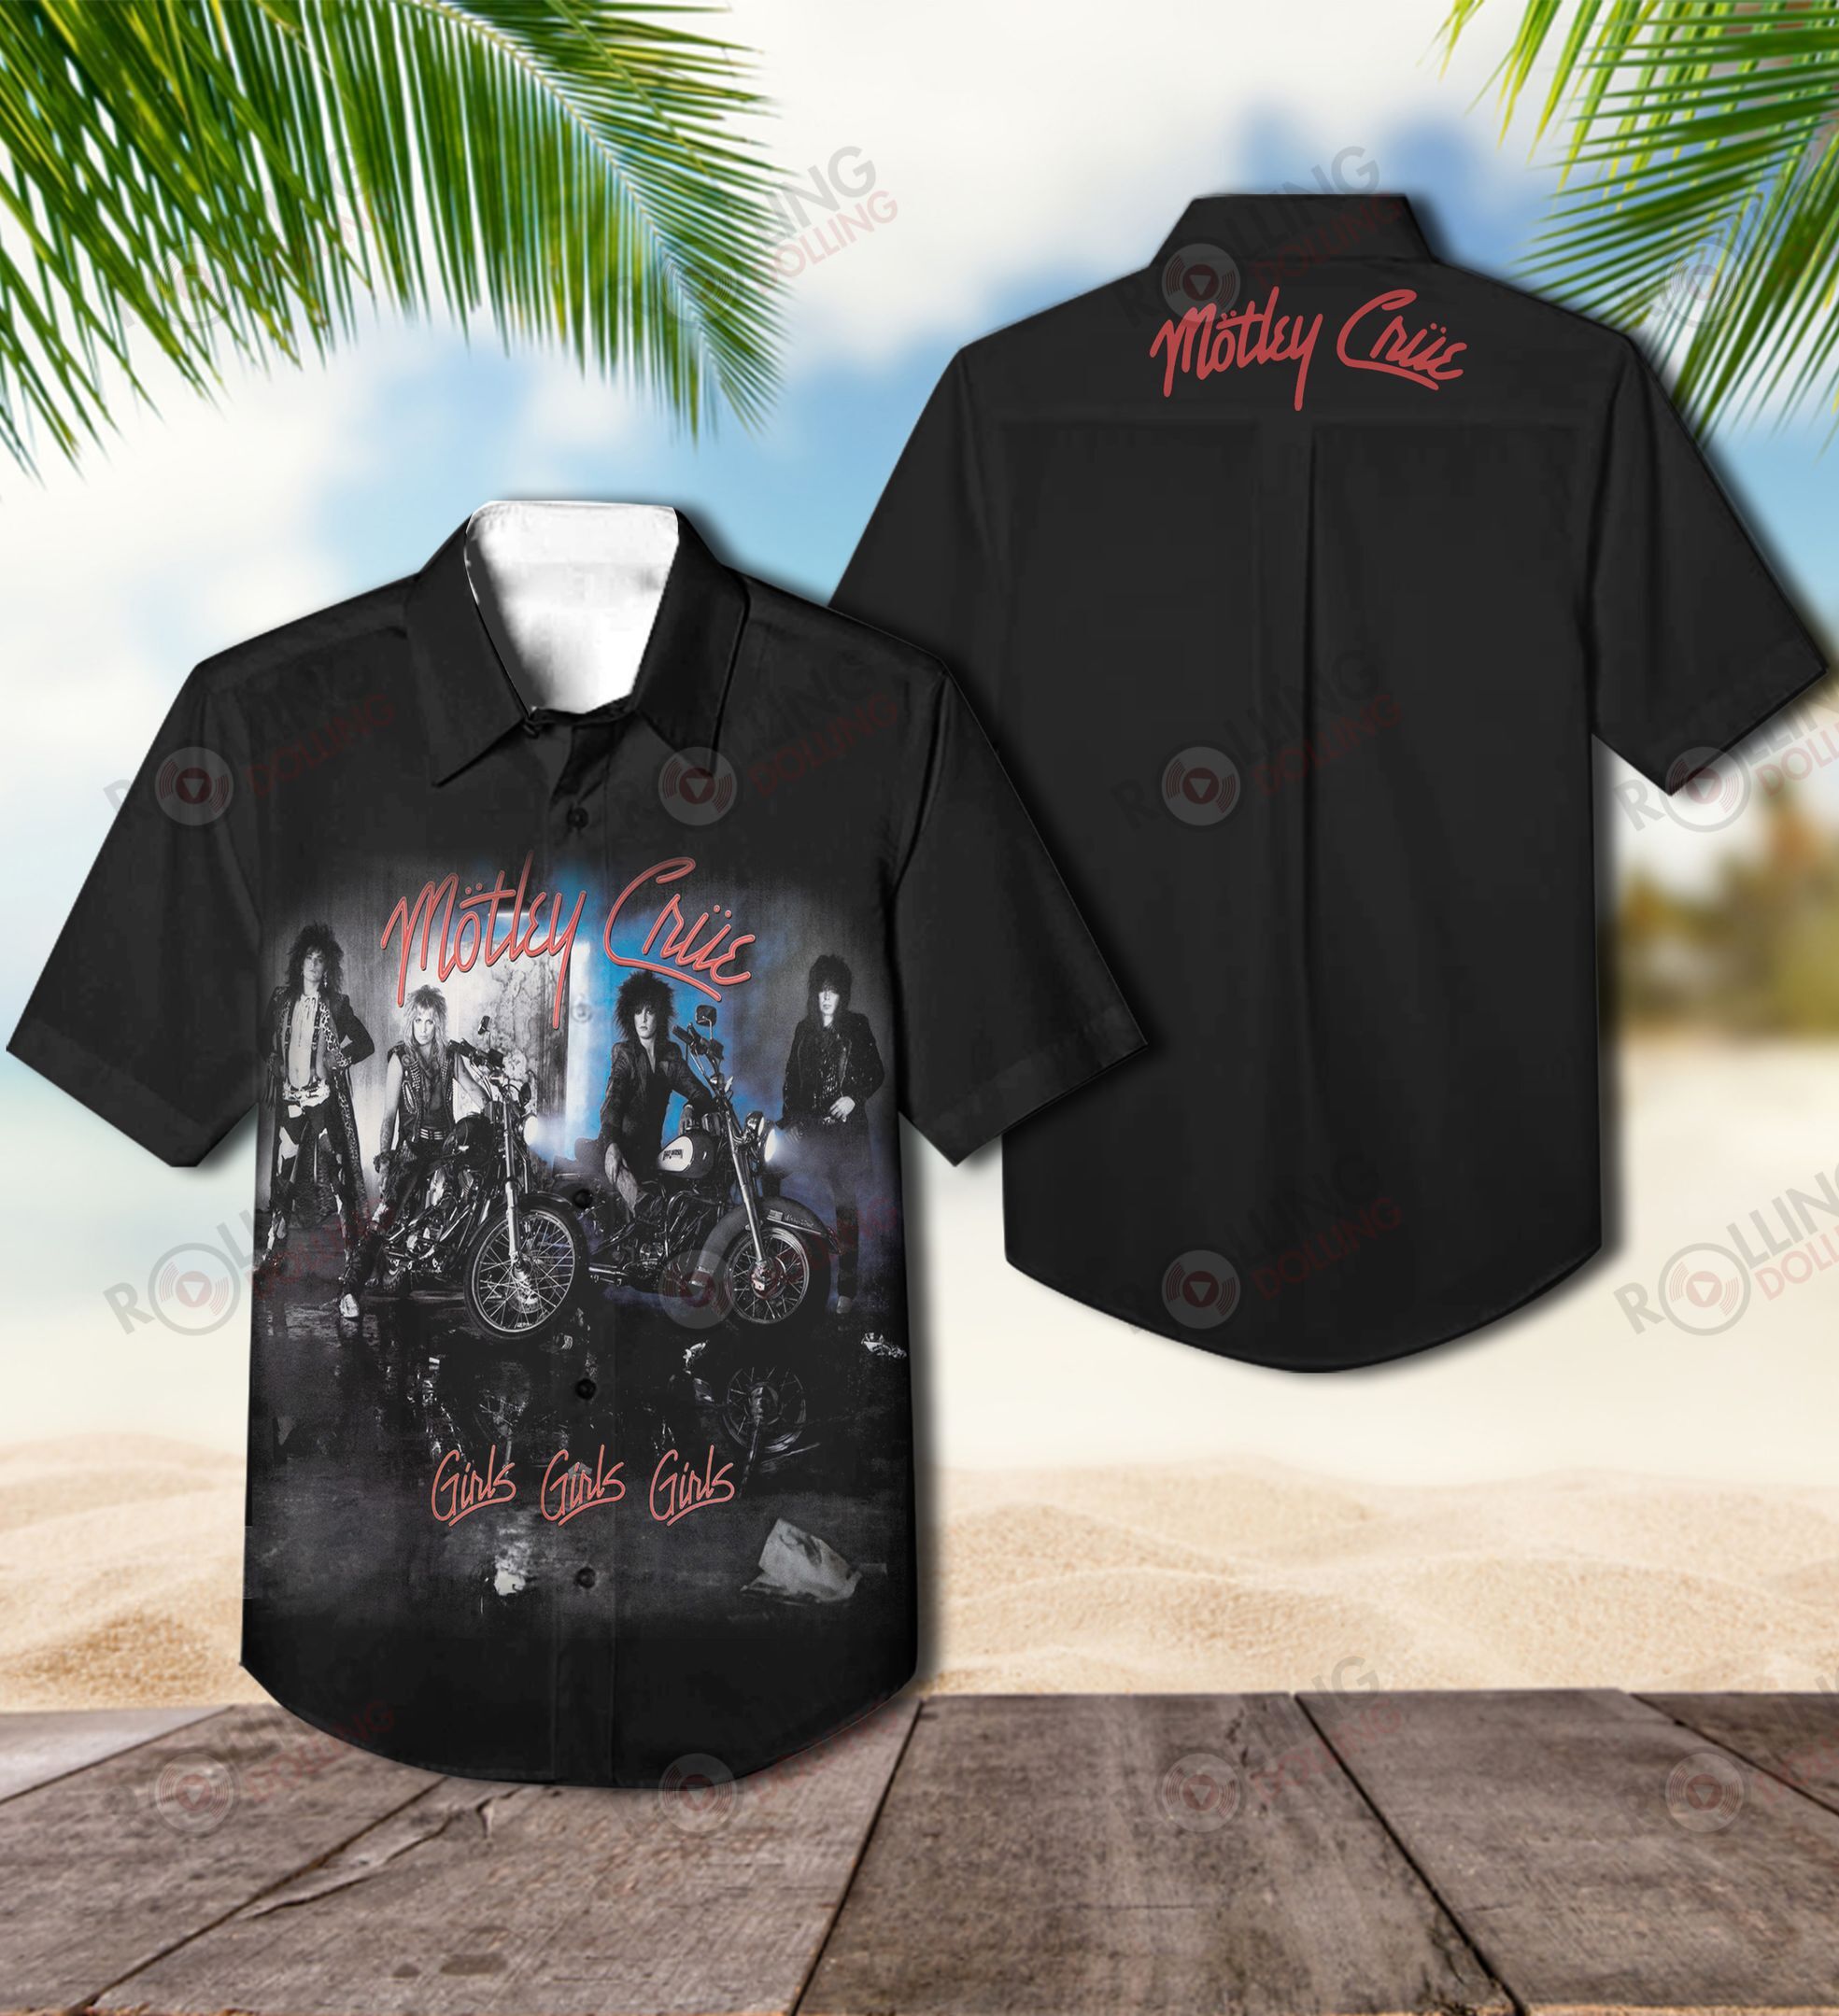 For summer, consider wearing This Amazing Hawaiian Shirt shirt in our store 56